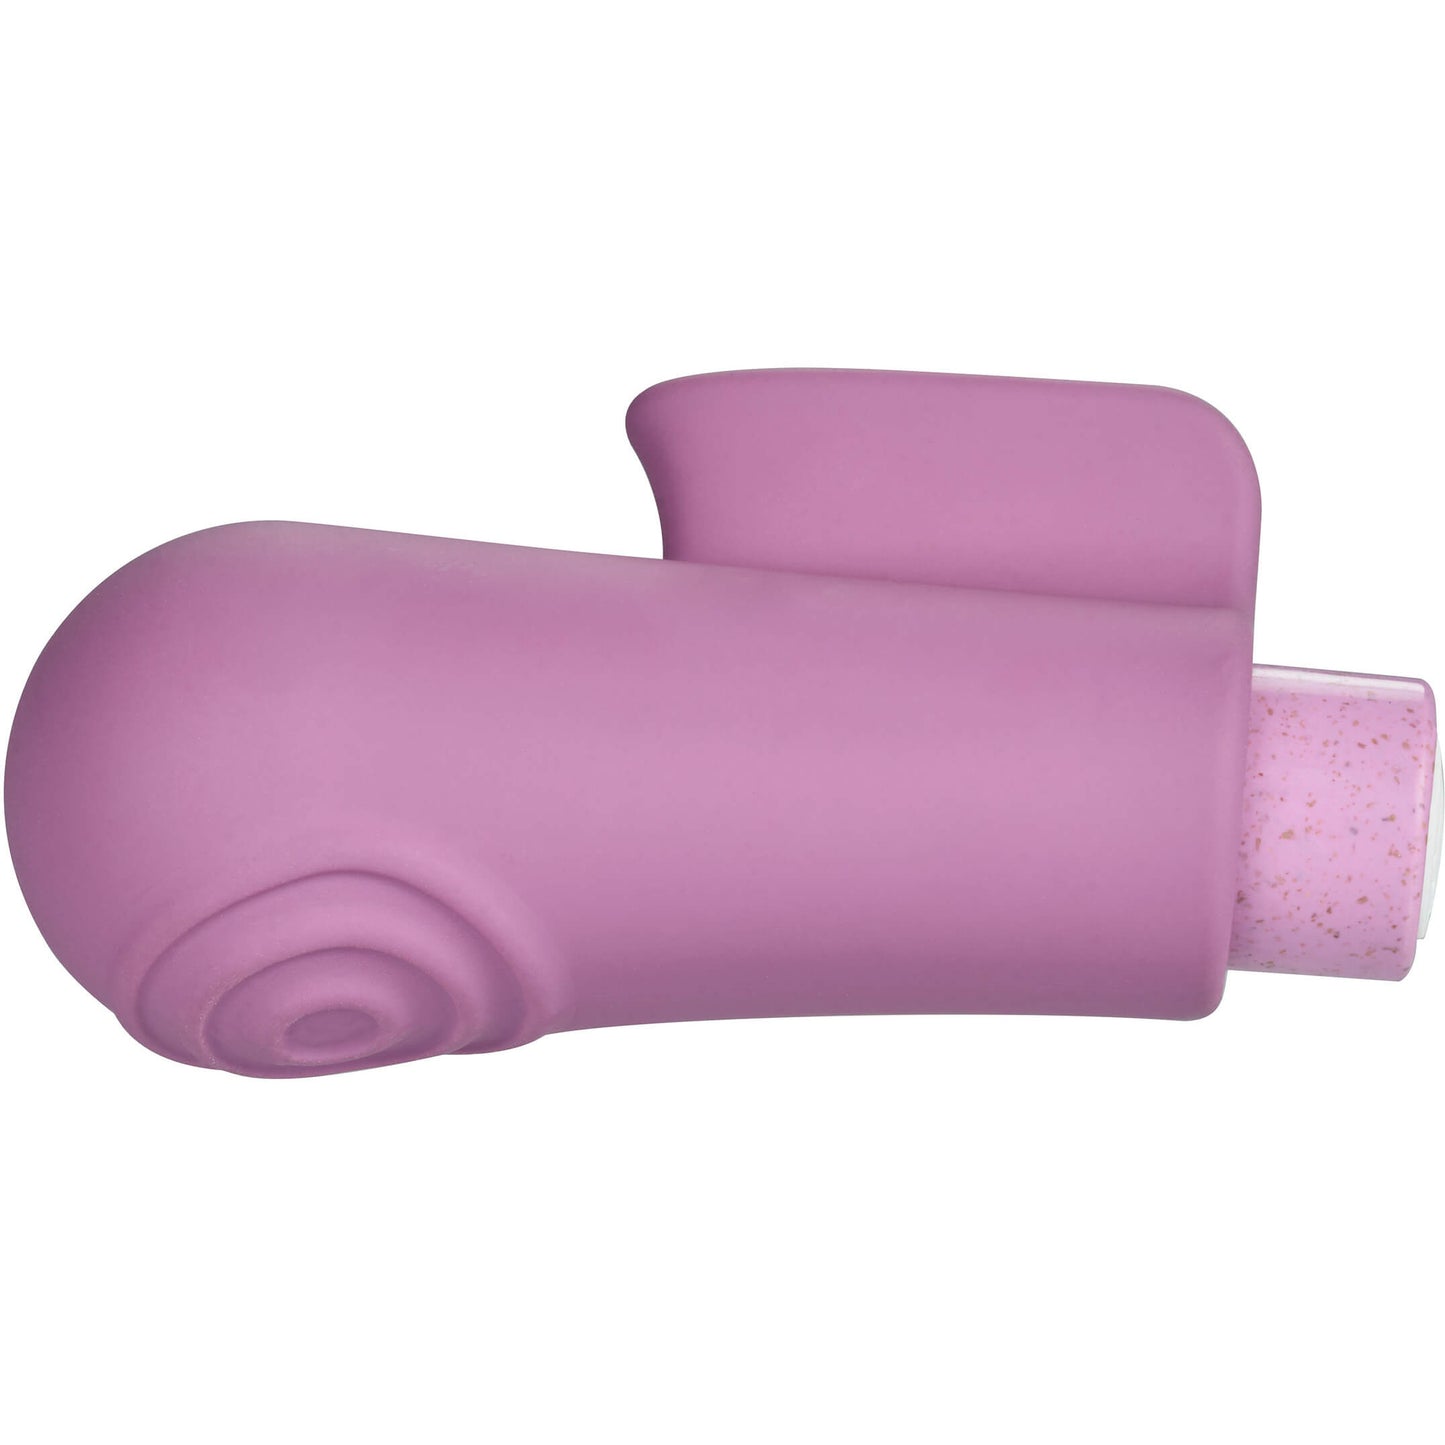 Blush Gaia Eco Delight - by The Bigger O online sex toy shop. USA, Canada, UK shipping available.